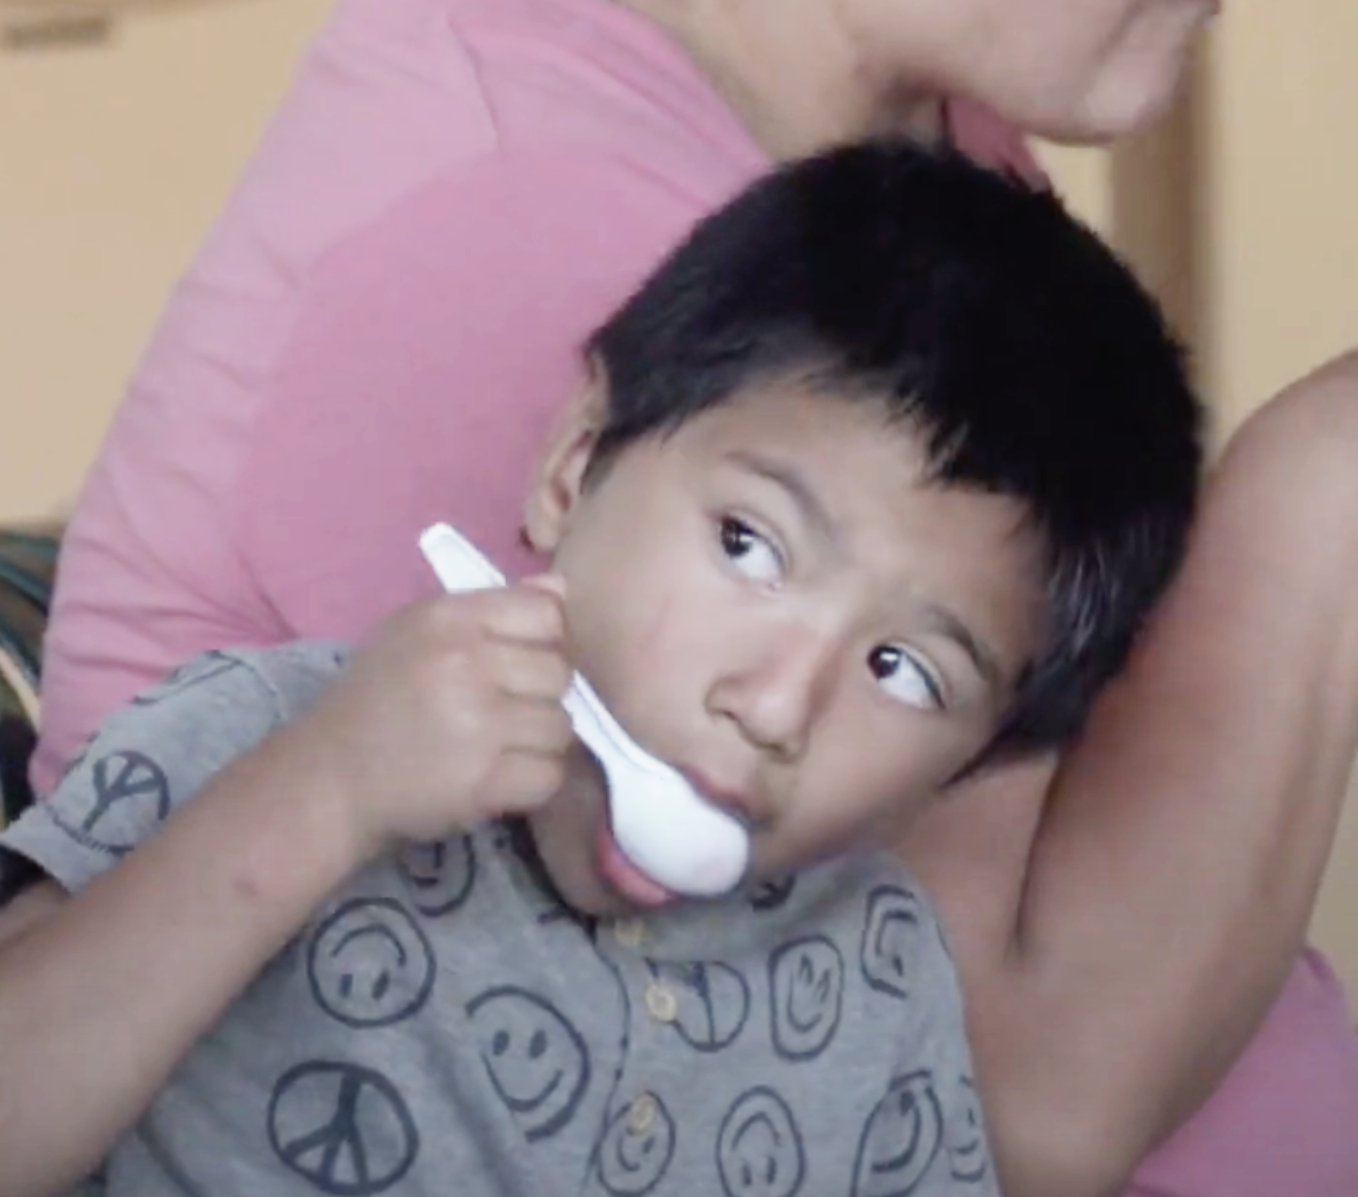 a young boy with a peace sign on his shirt is holding a white spoon in his mouth